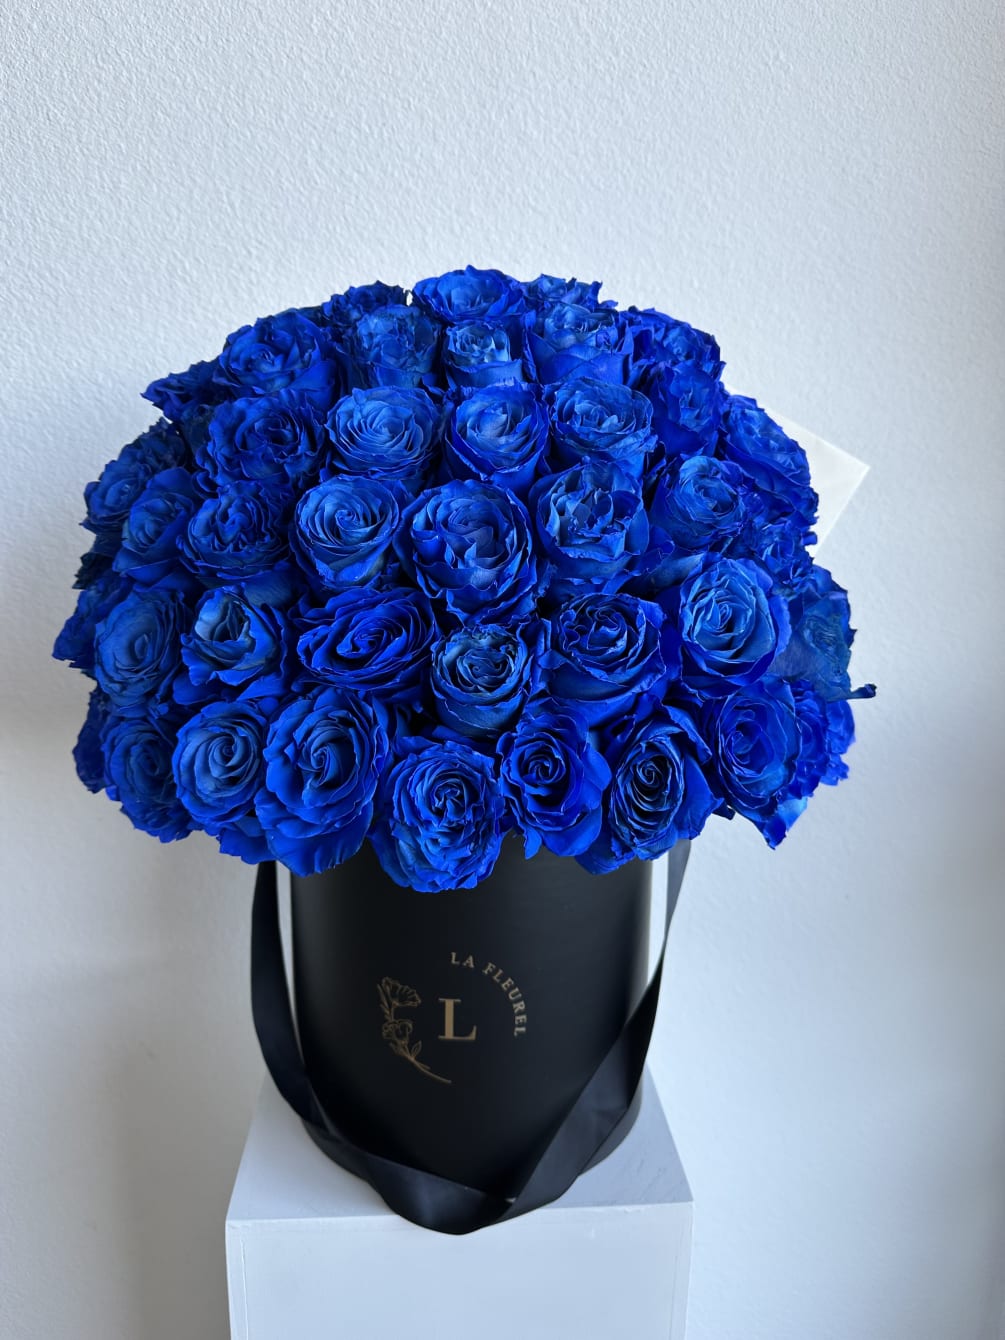 This beautiful arrangement filled with the royal blue roses to deliver your